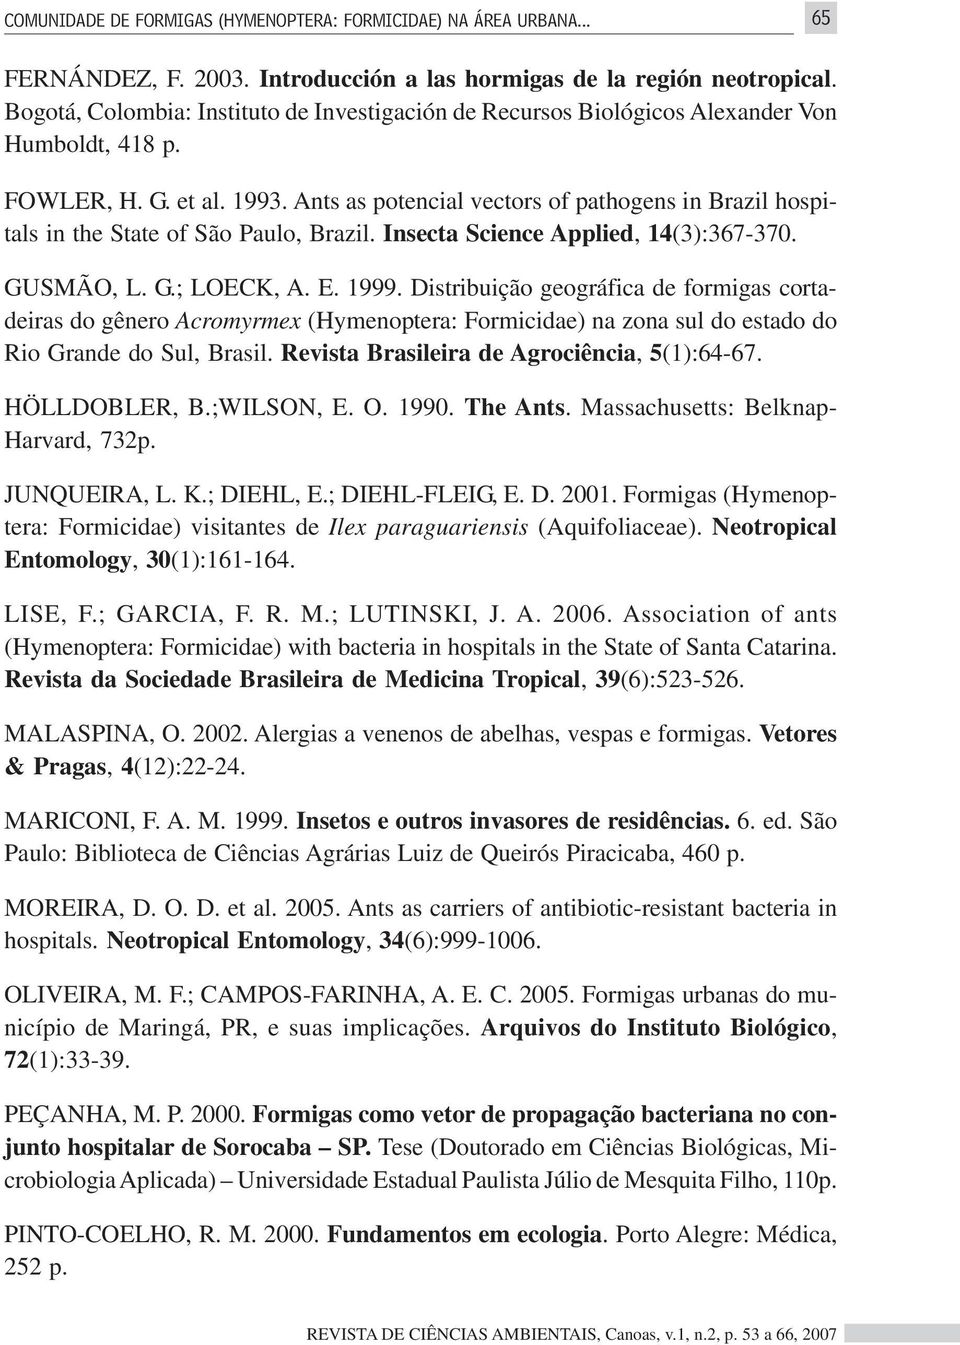 Ants as potencial vectors of pathogens in Brazil hospitals in the State of São Paulo, Brazil. Insecta Science Applied, 14(3):367-370. GUSMÃO, L. G.; LOECK, A. E. 1999.